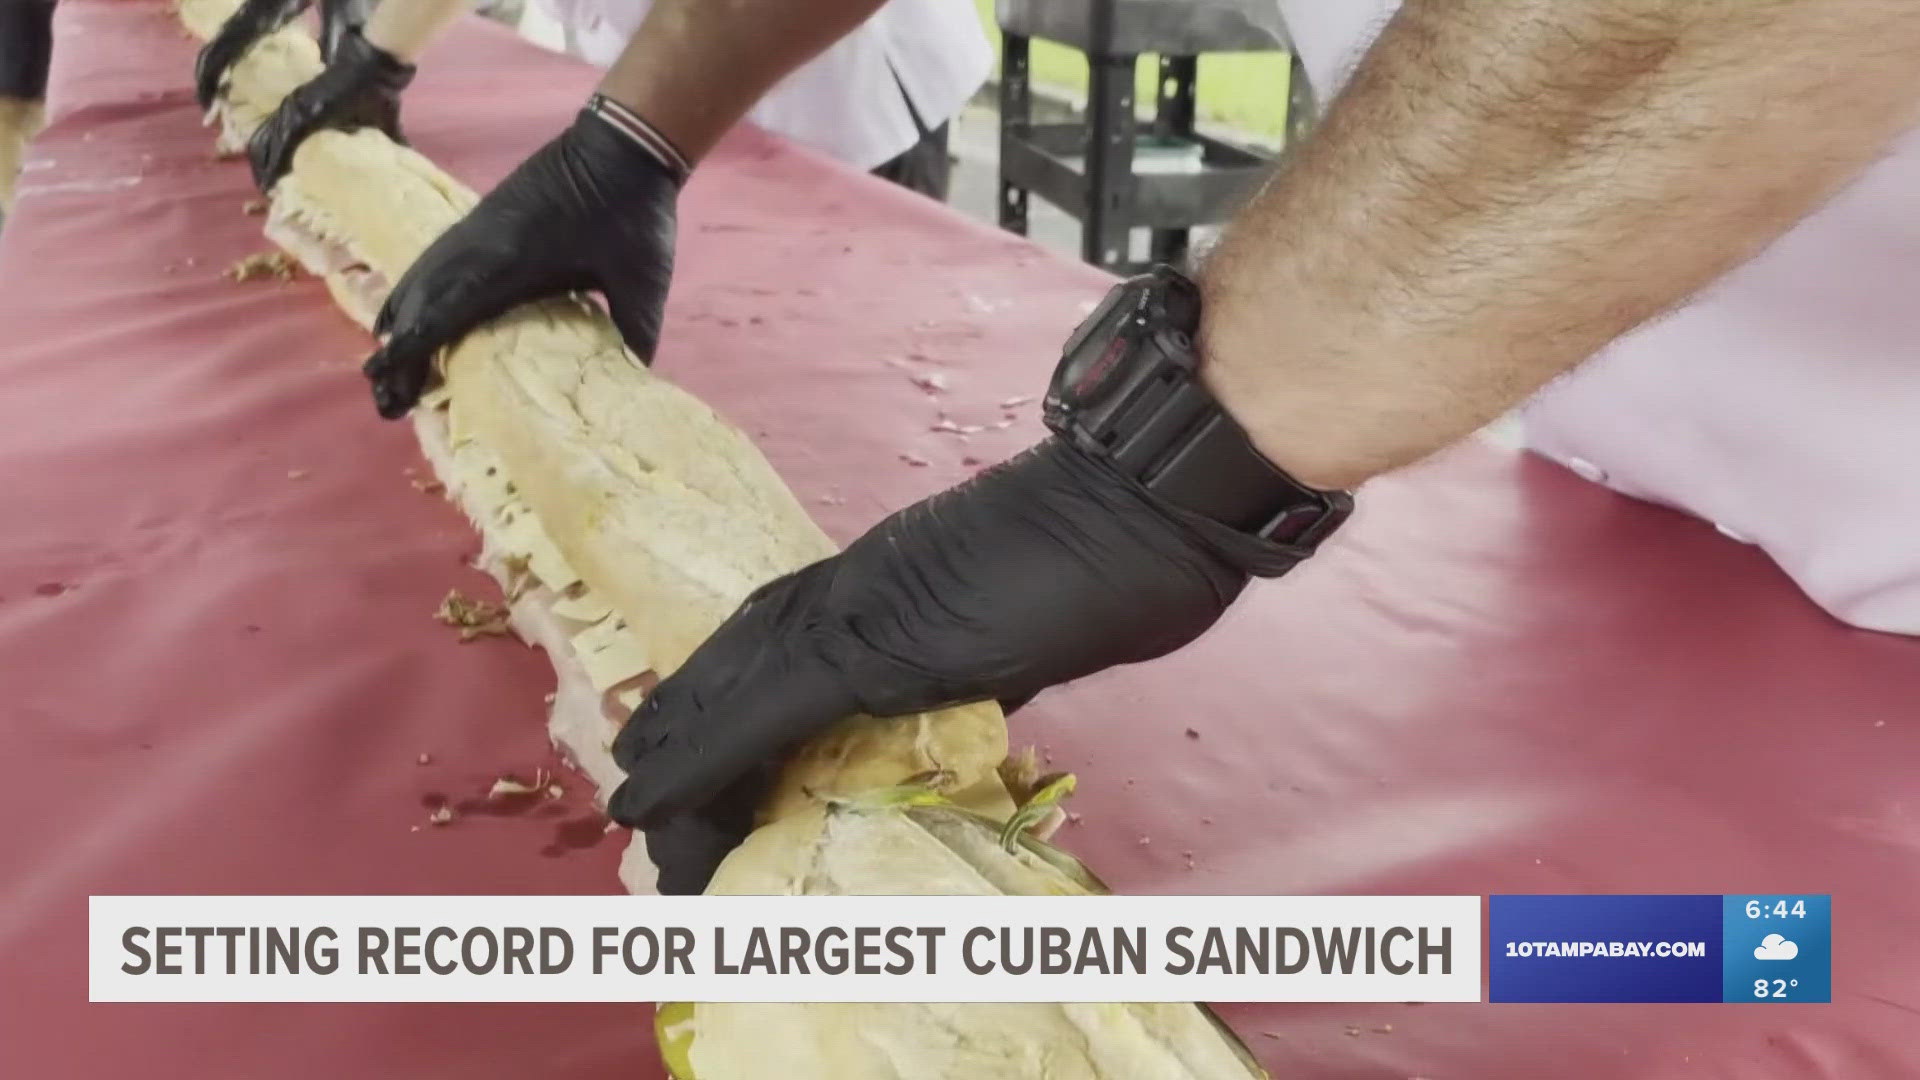 10 Tampa Bay's Nick Volturo has all the "mouthwatering" details from Sunday's Cuban Sandwich Festival.